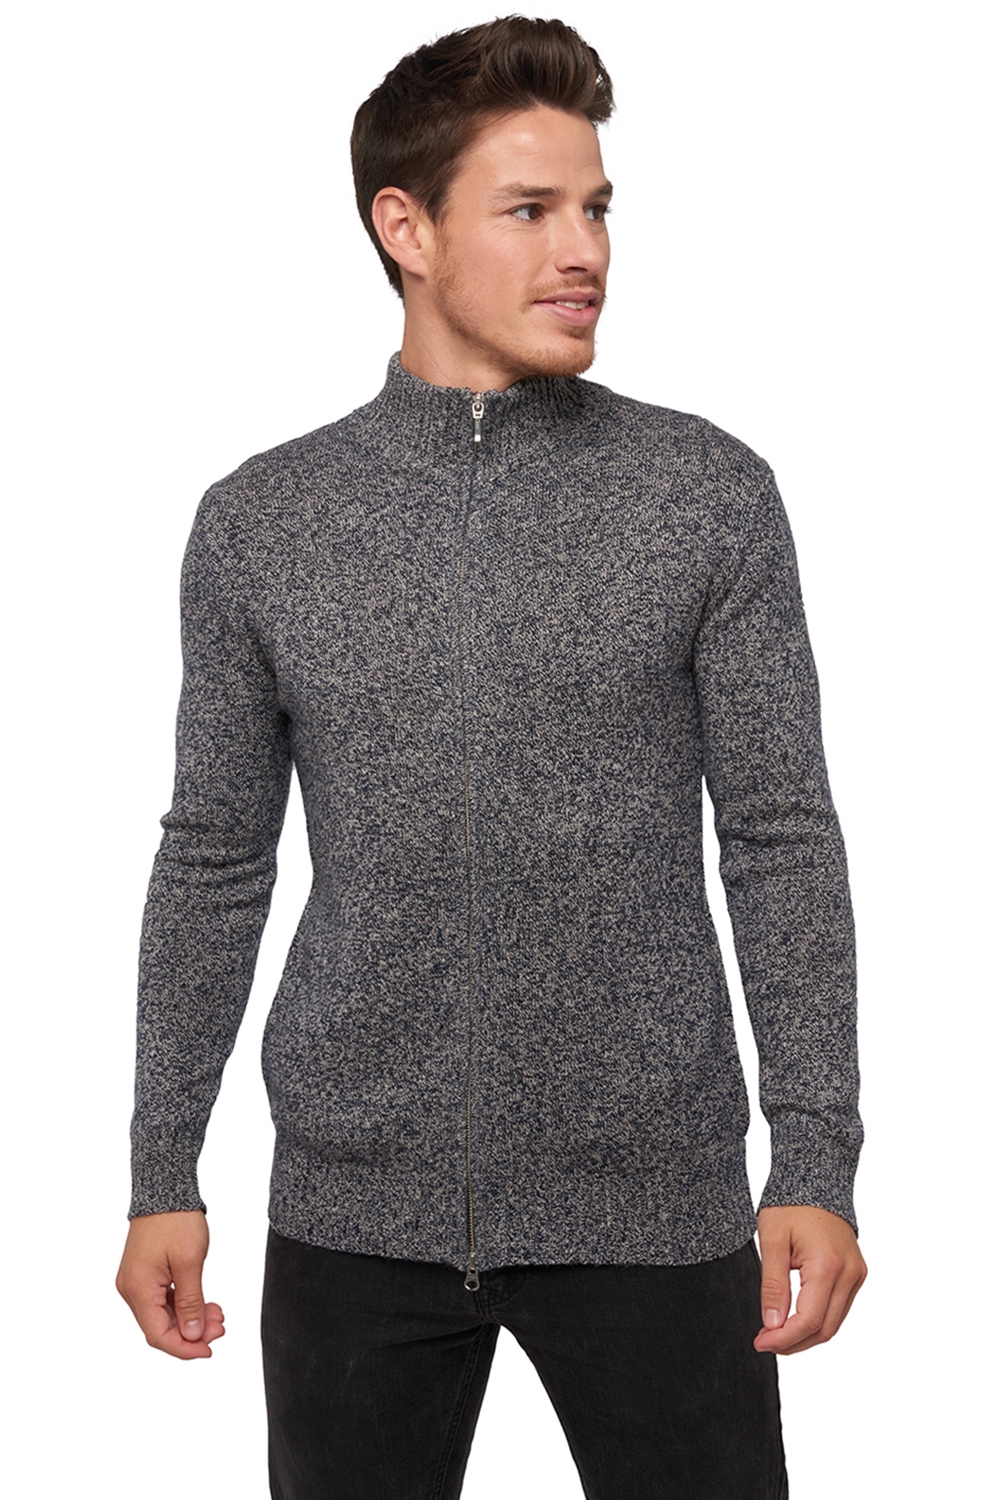 Chameau pull homme clyde voyage m